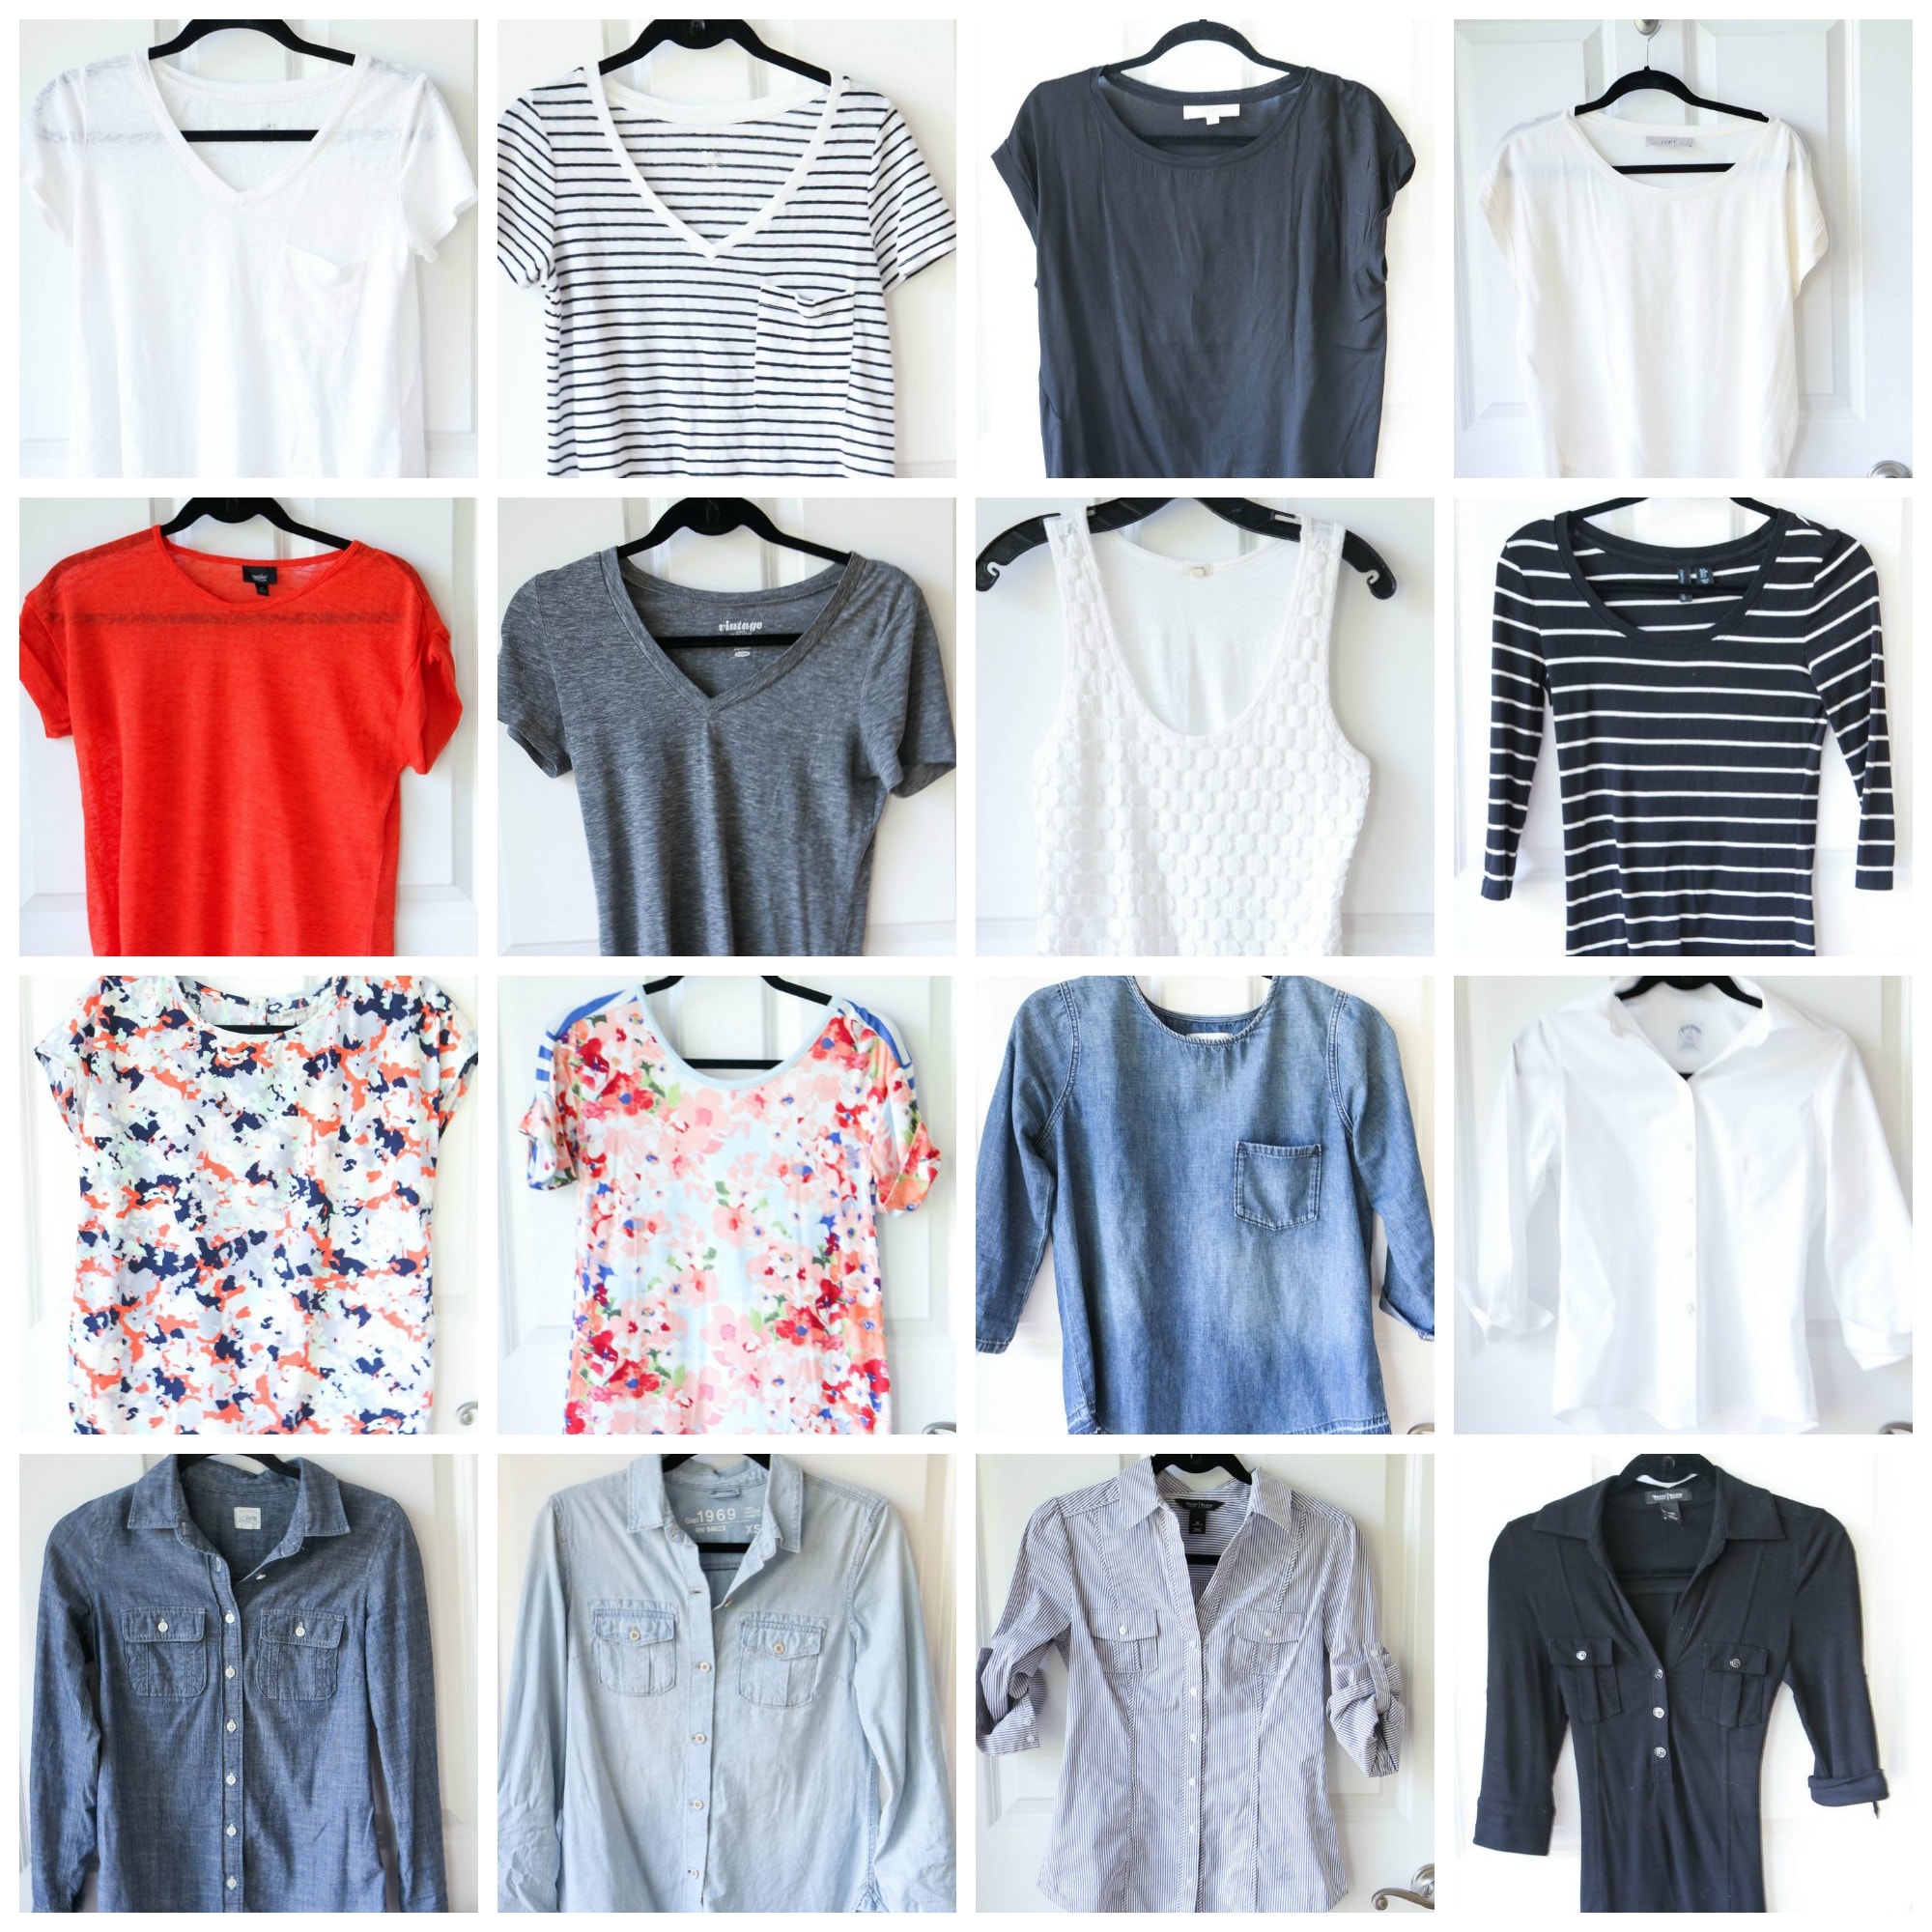 Spring and Summer 2016 Fashion Capsule Wardrobe